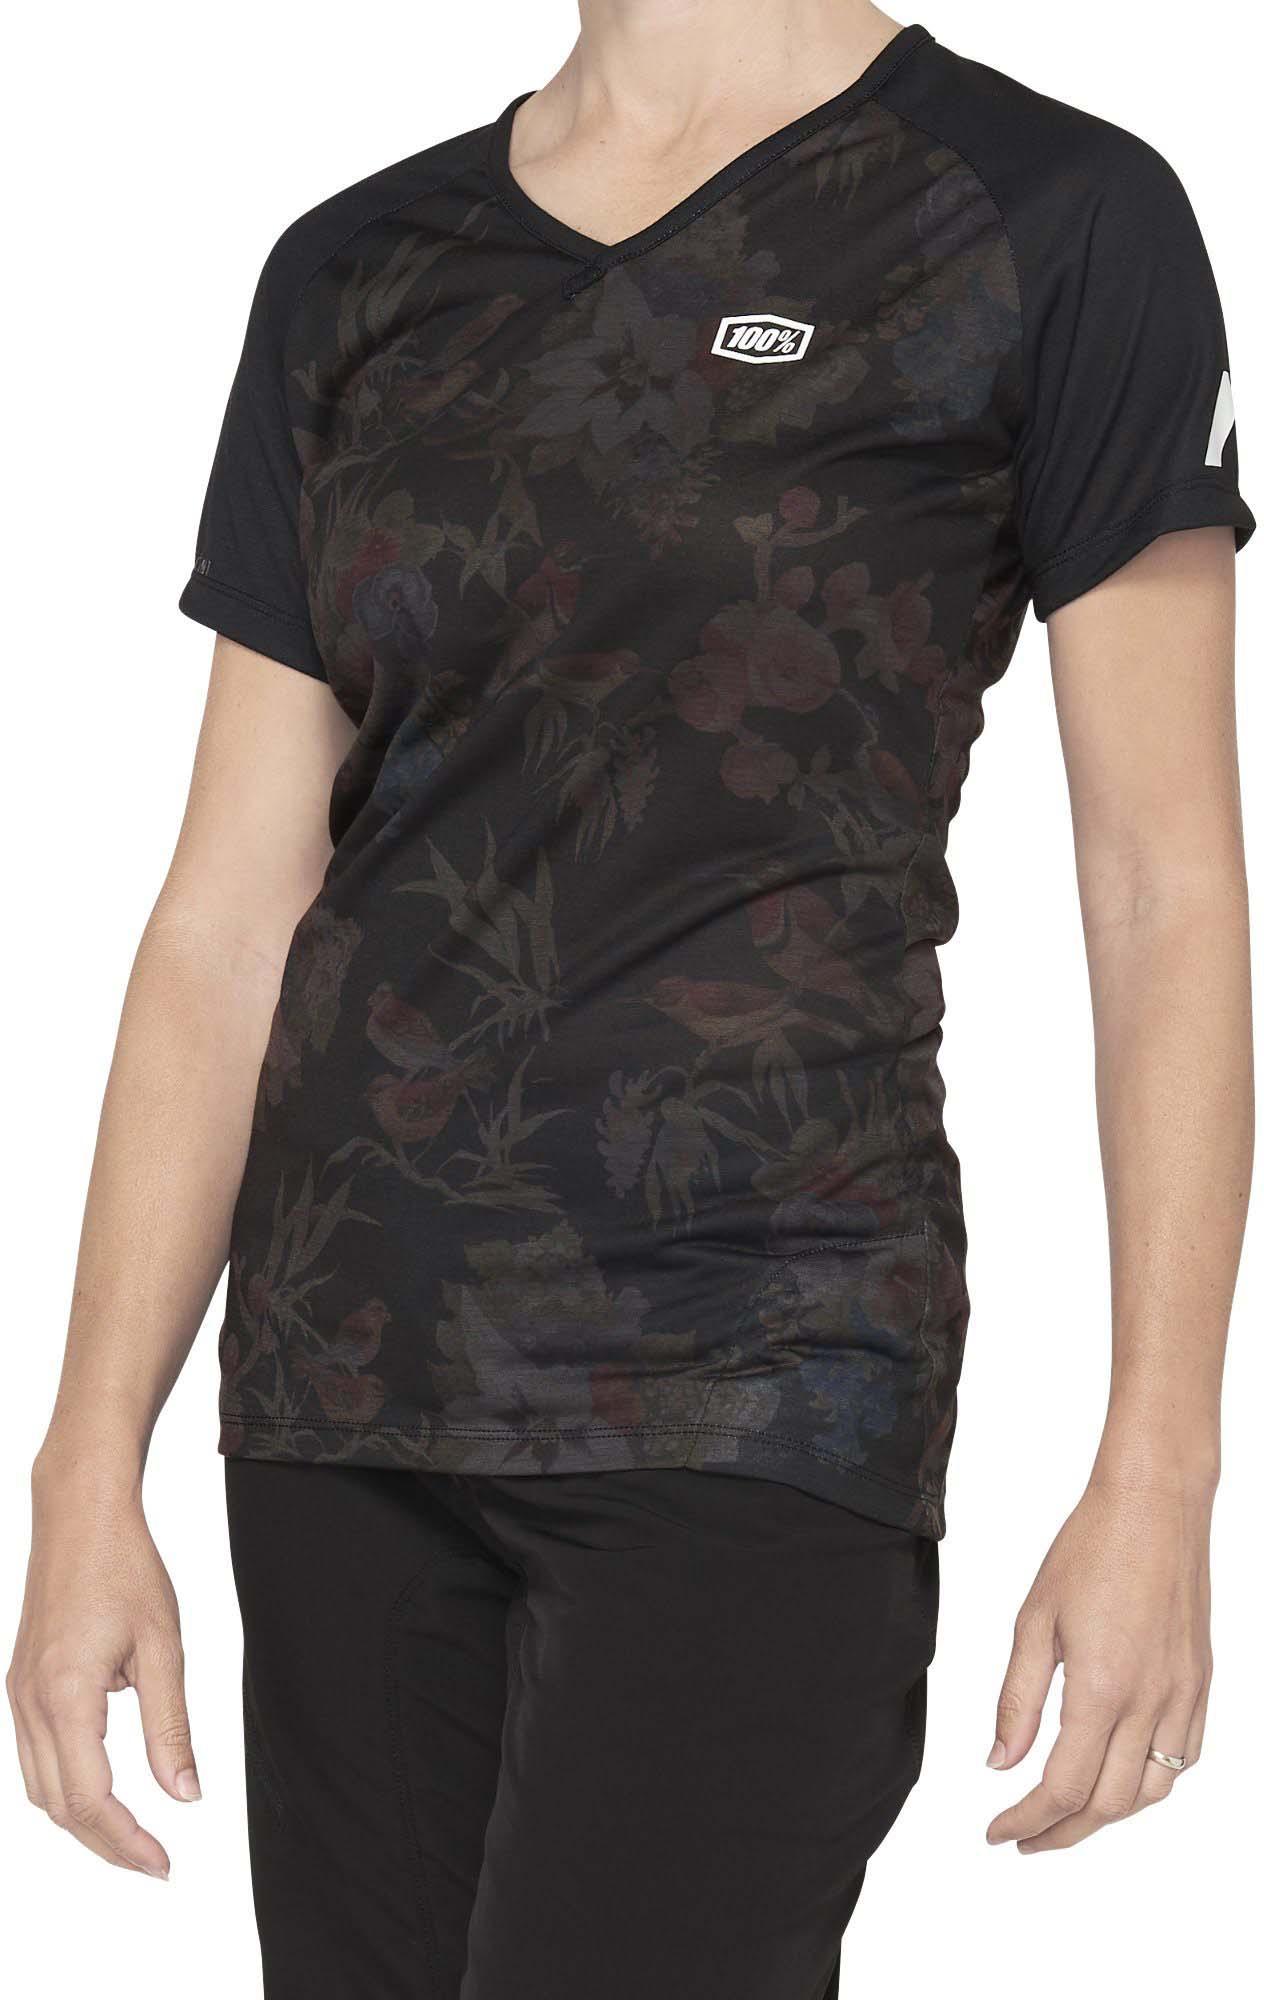 100% Womens Airmatic Jersey - Black Floral